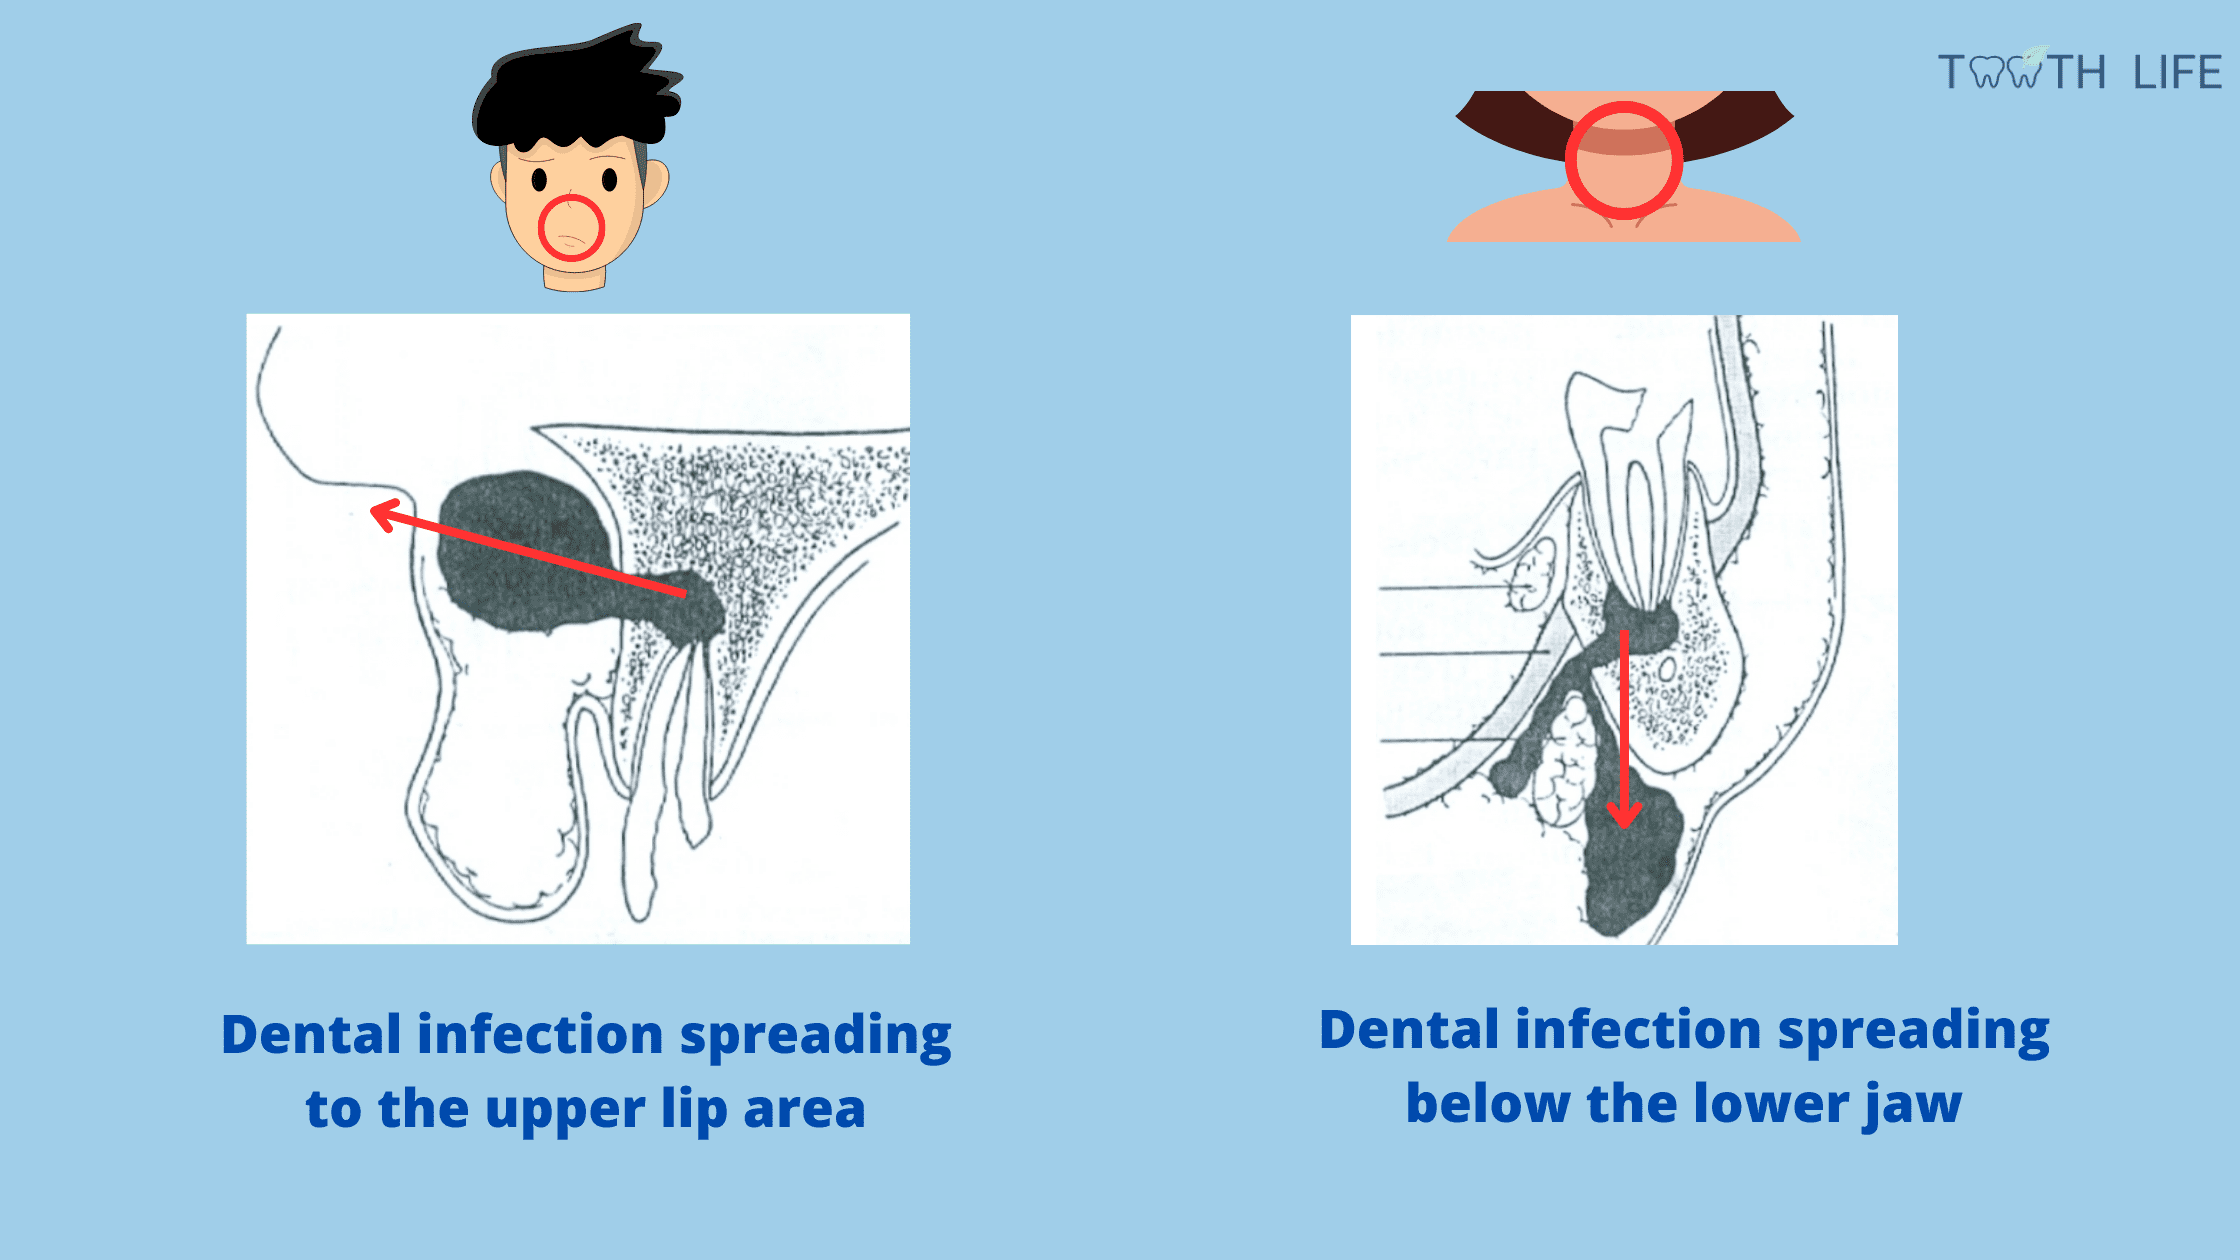 tooth infection spreading to face: upper lip and neck area